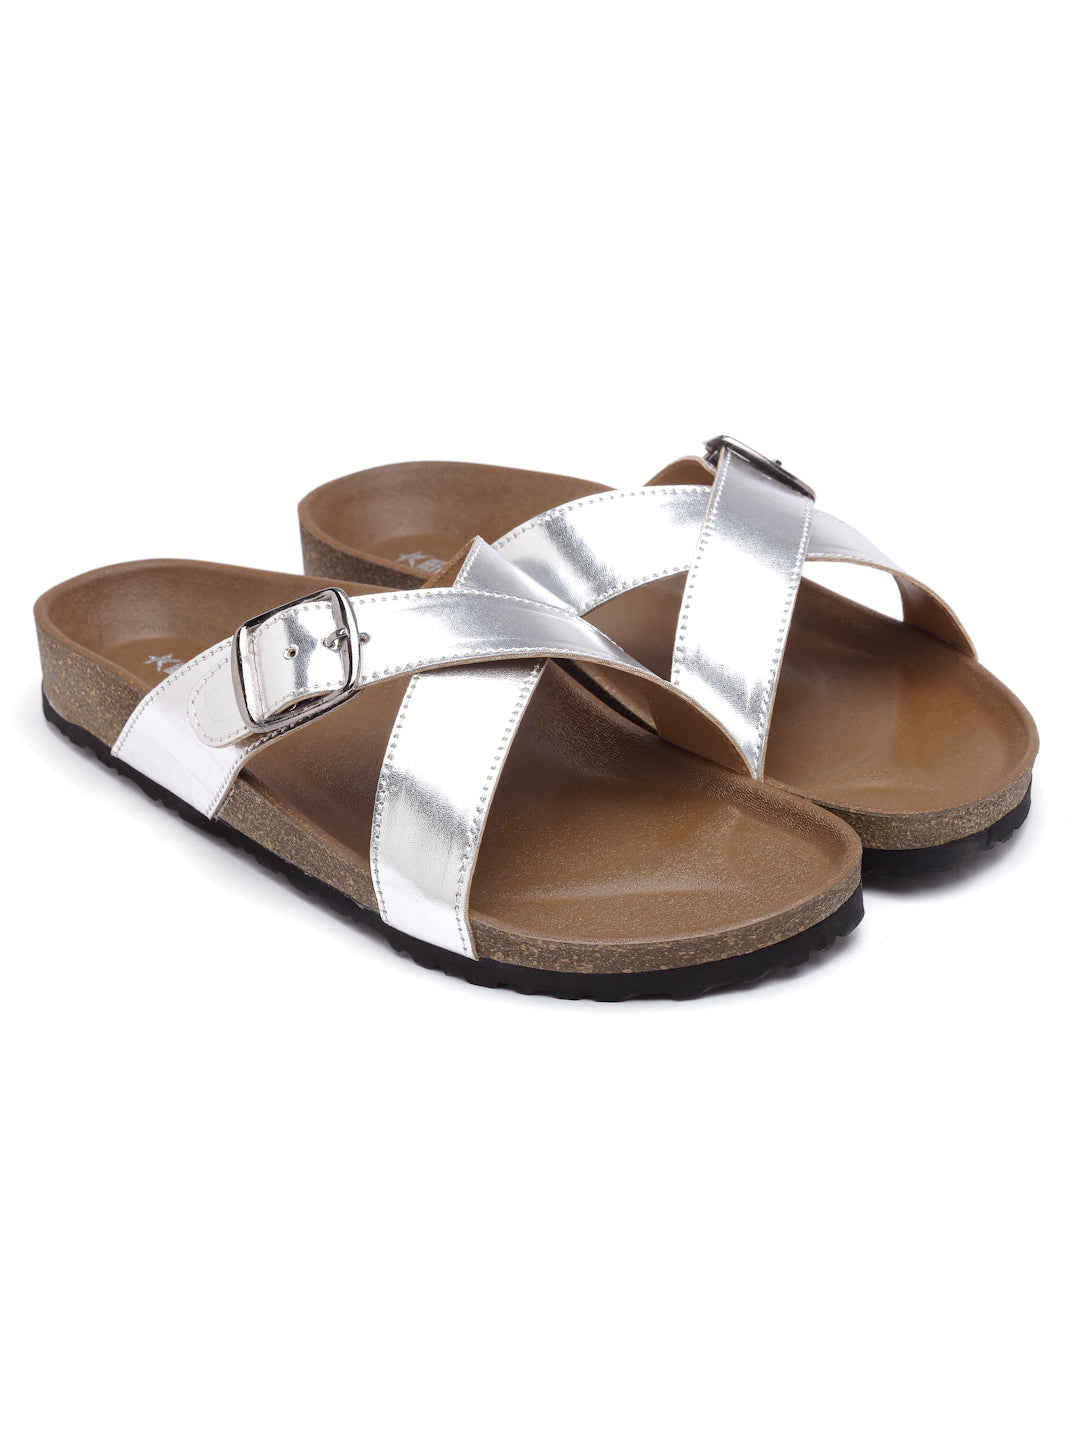 Women's Stylish Silver Synthetic Leather Casual Sandal